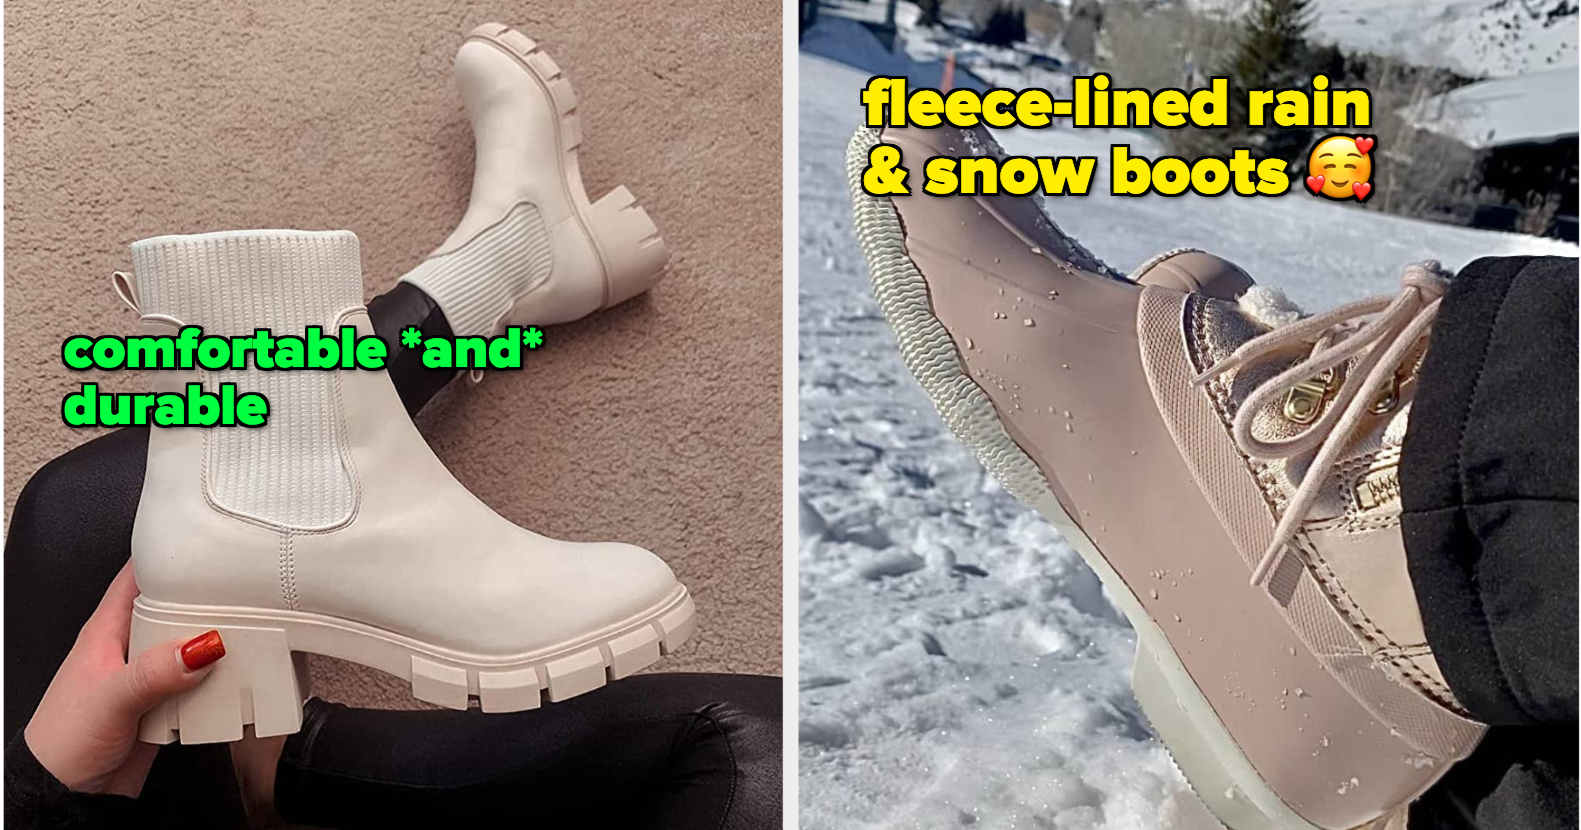 22 Amazing Shoe Options For Your Winter Wardrobe